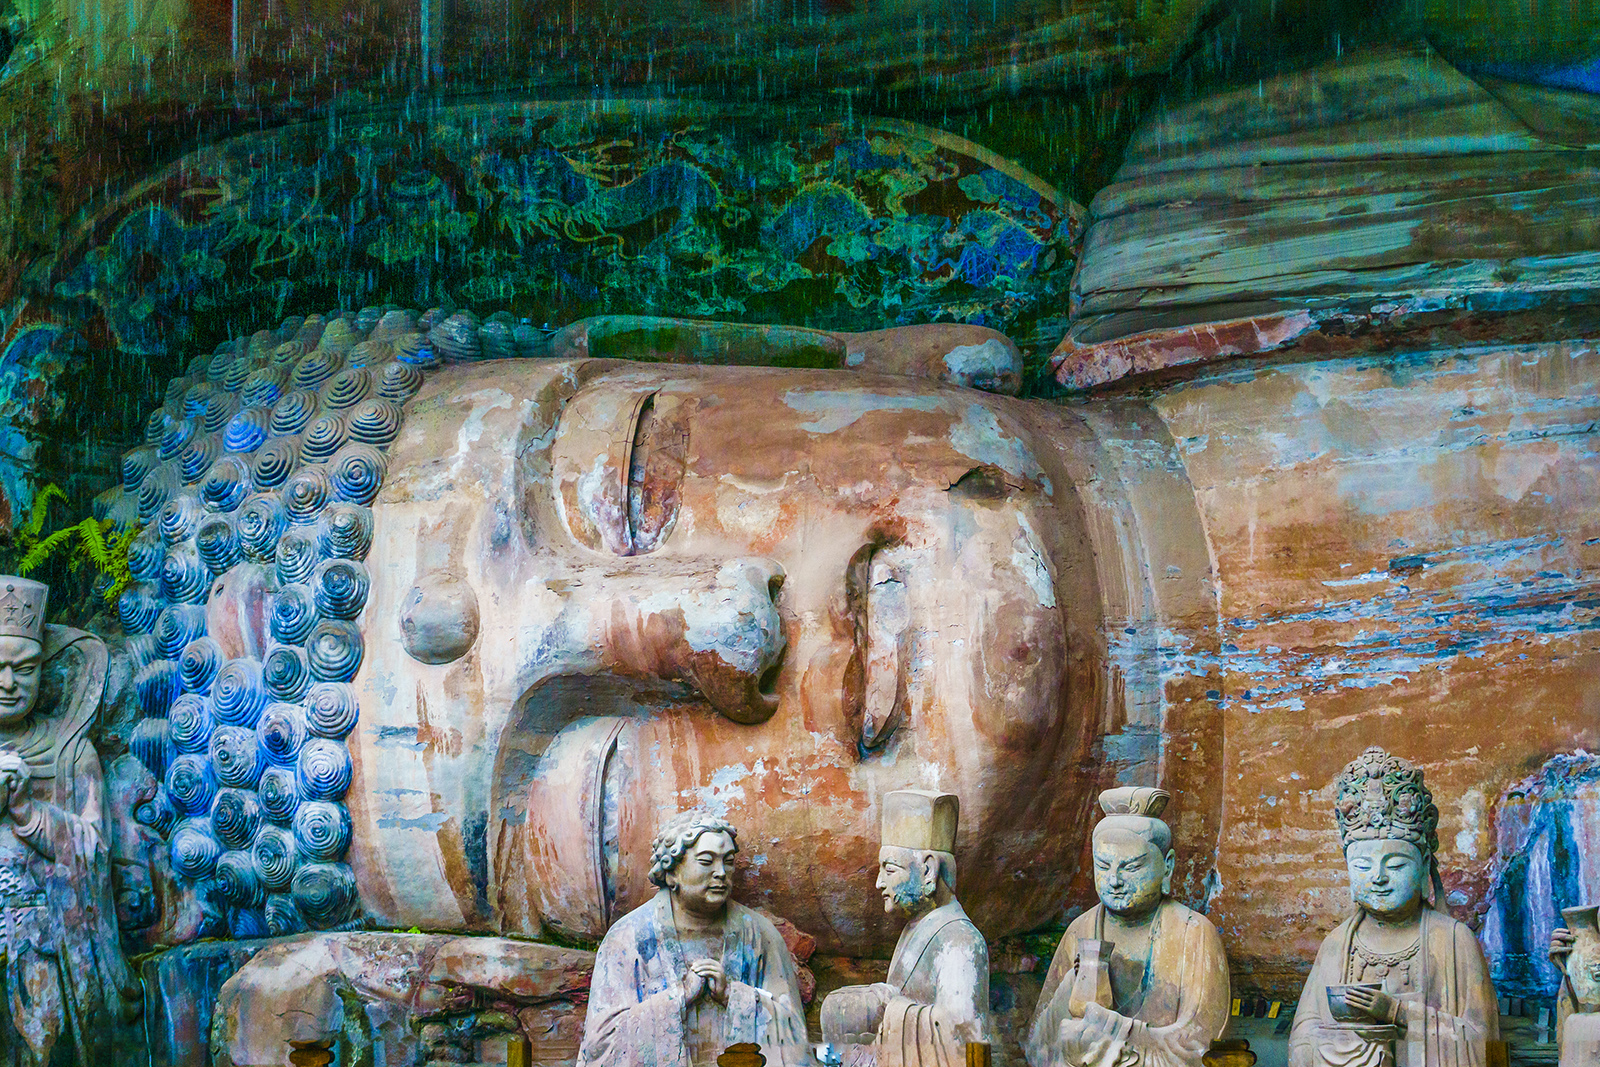 The remarkable statues at the Dazu Rock Carvings in Chongqing. /IC